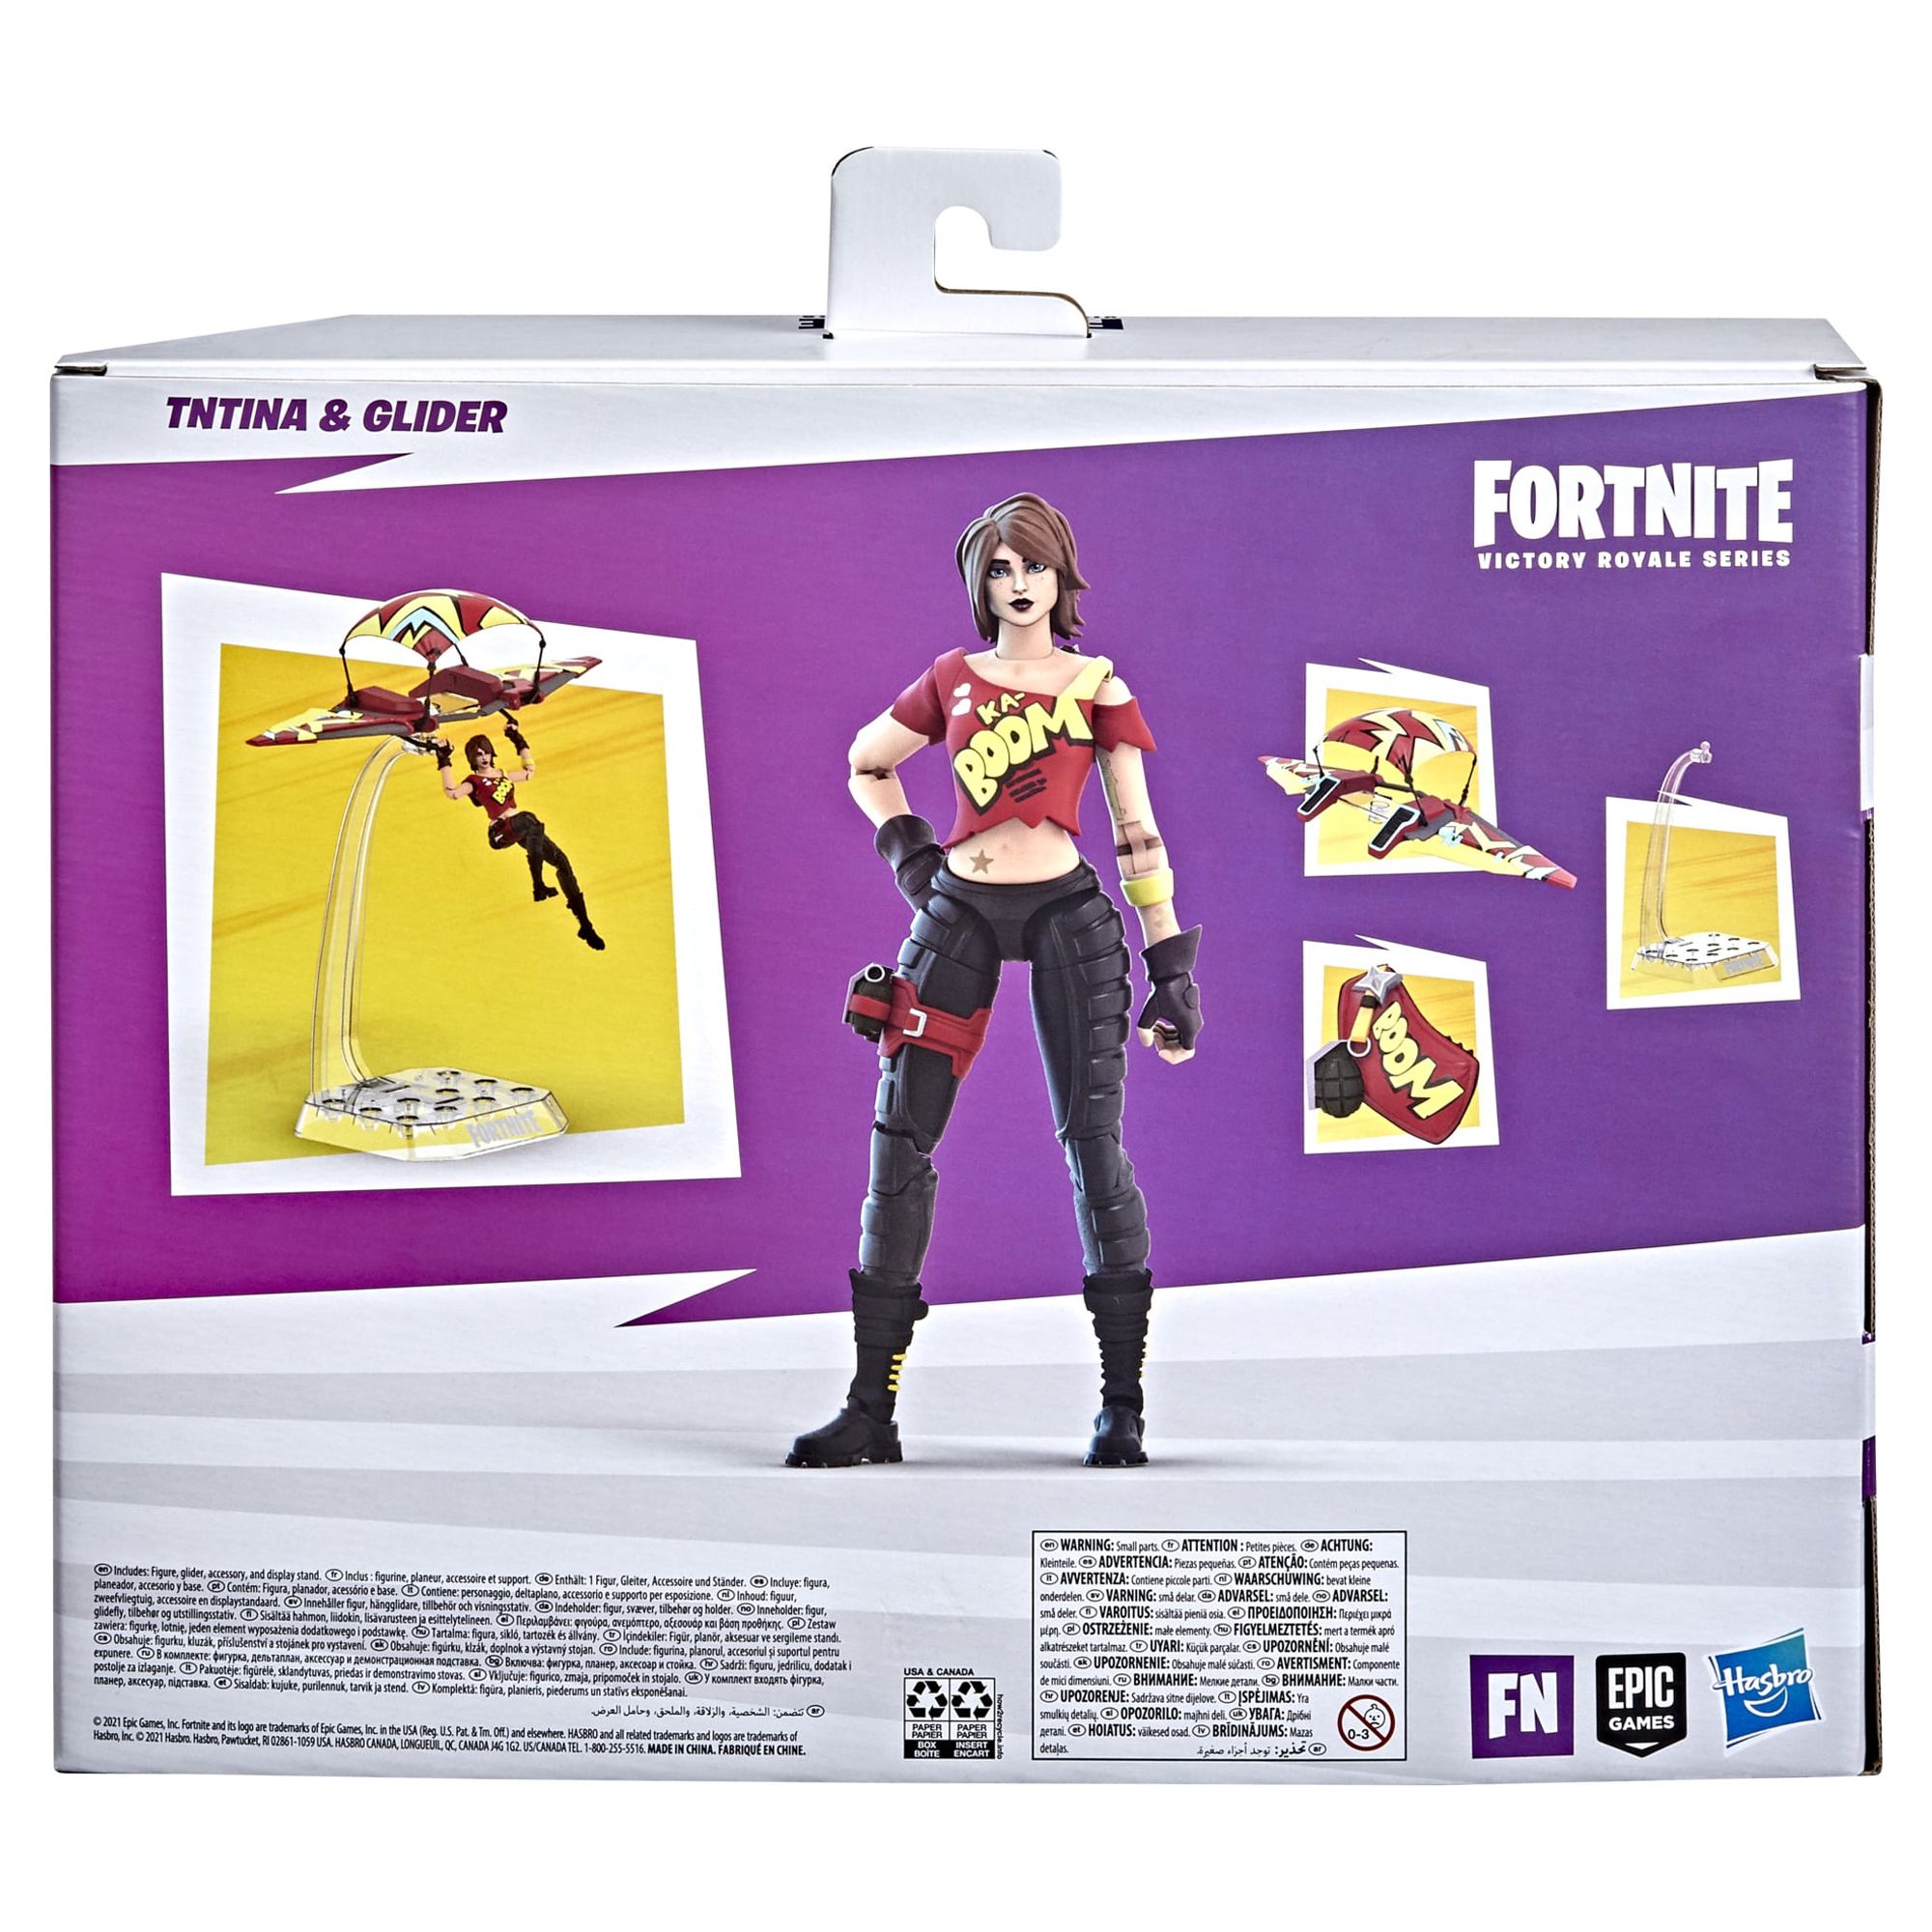 Fortnite: Victory Royale Series TNTina with glider Collectible Kids Toy Action Figure for Boys and Girls Ages 8 9 10 11 12 and Up - image 5 of 5